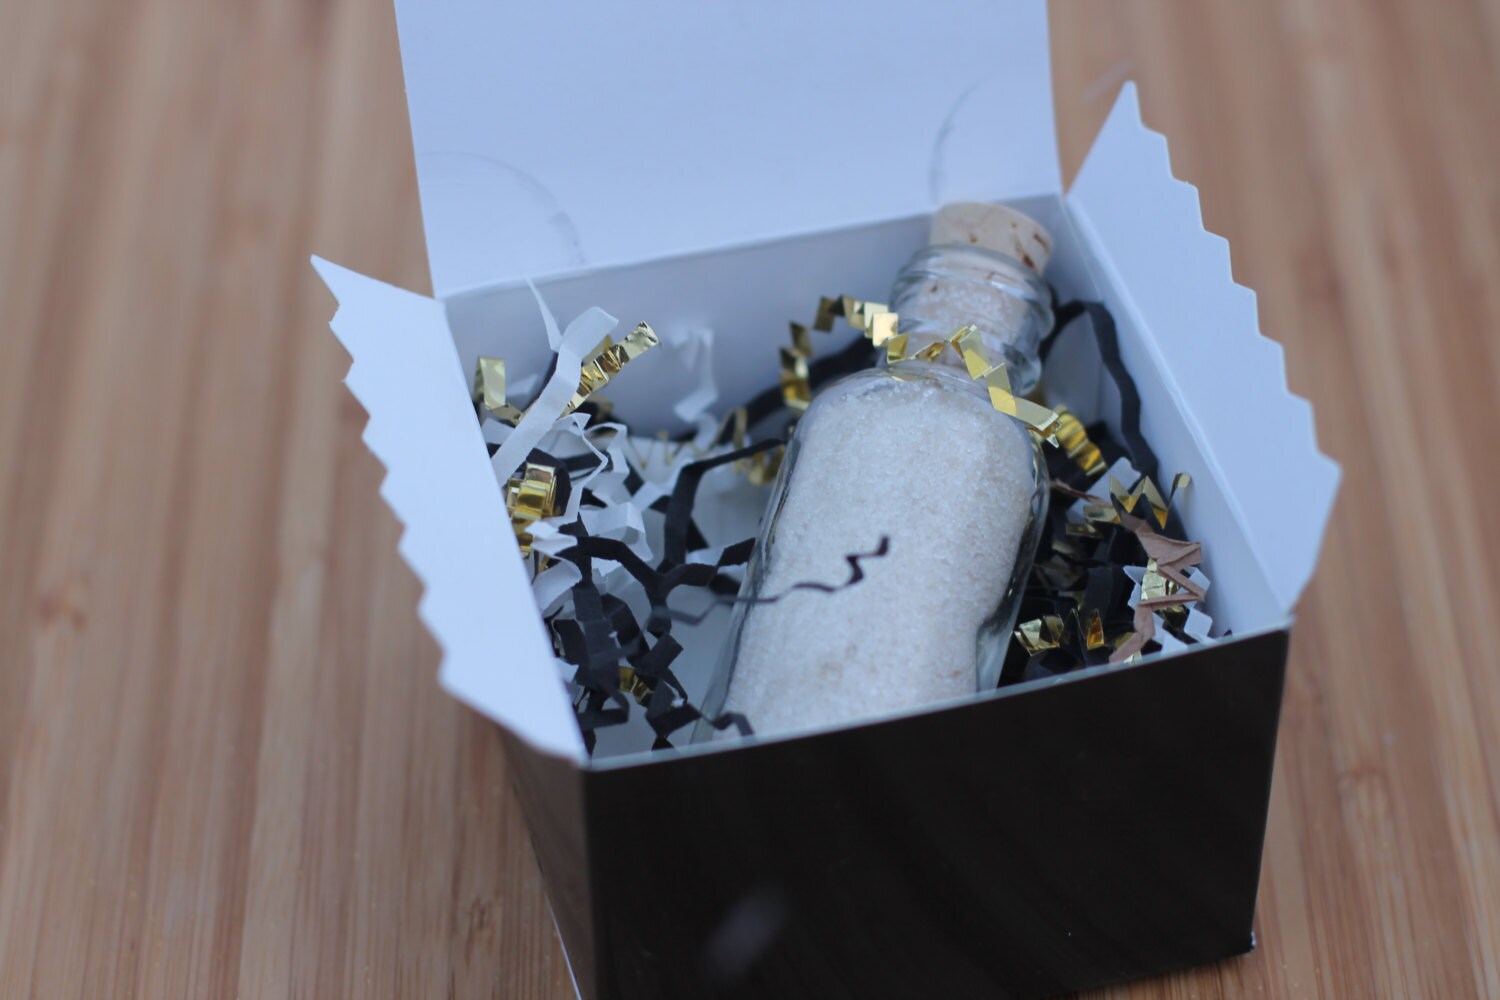 Tea Party Favor-Luxe Boxed Set-Black and White - Wedding-Bridal Shower-Baby Shower-Belle Savon Vermont